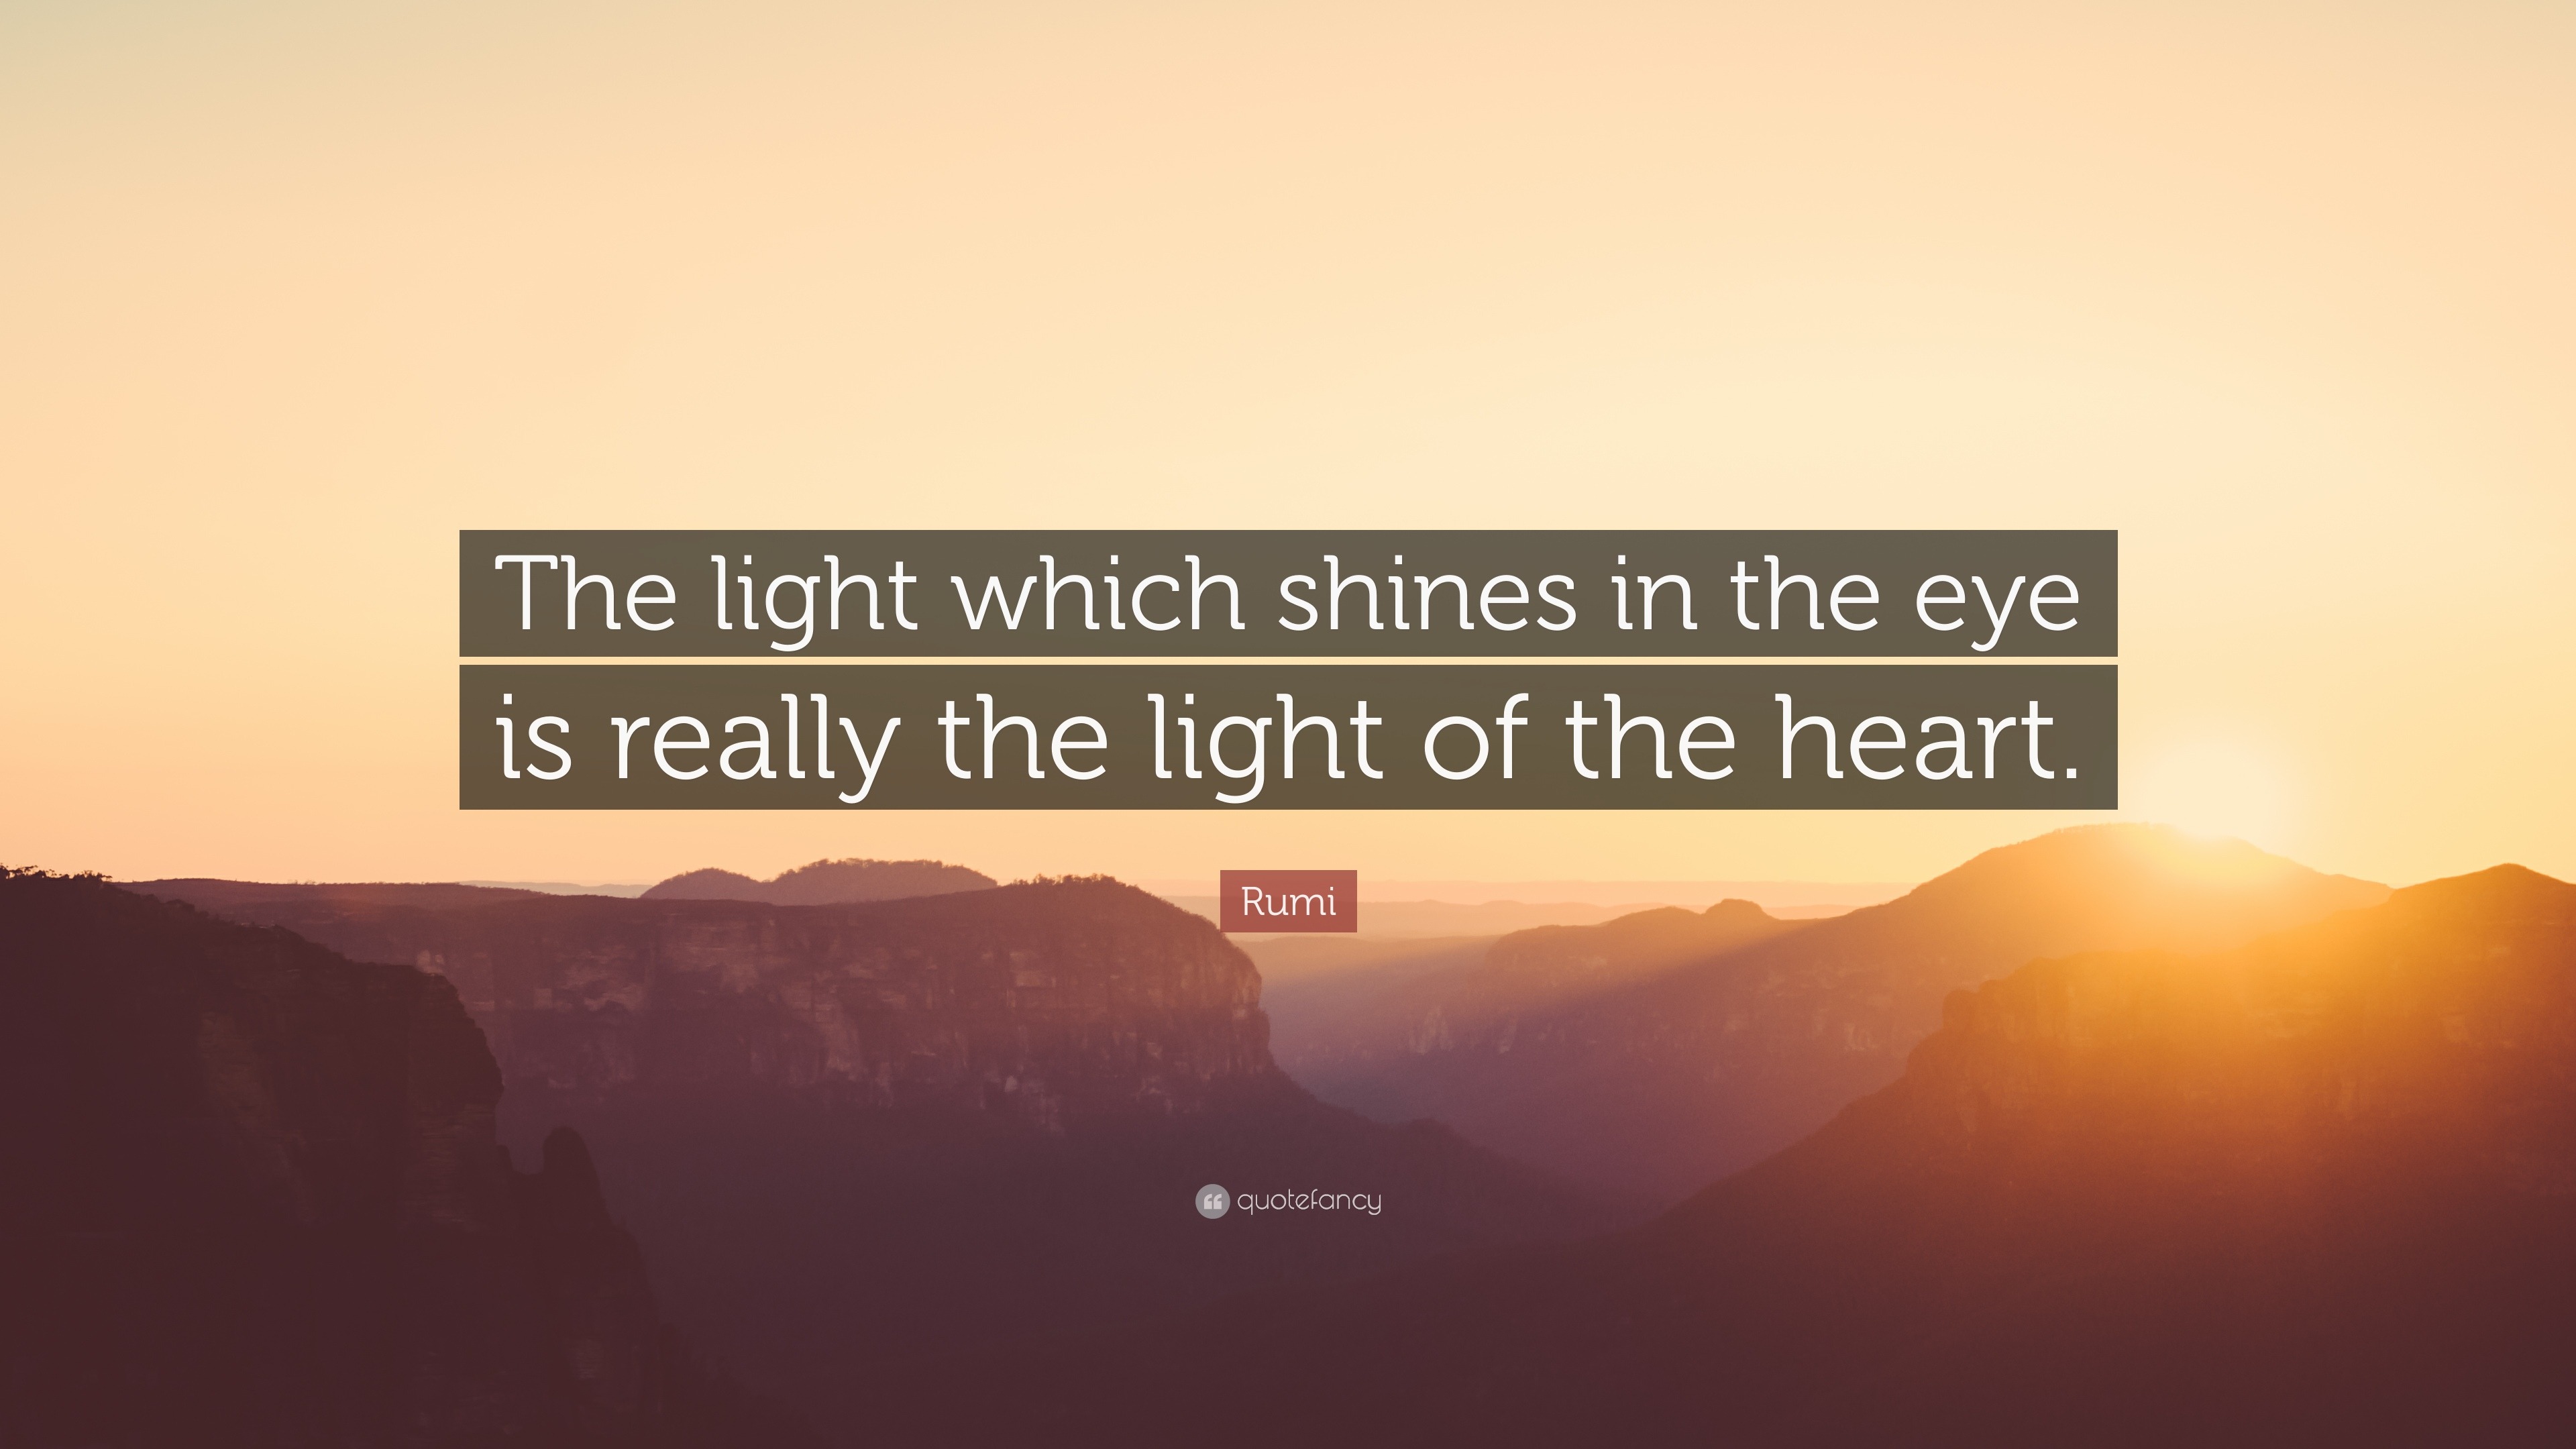 images of eyes with quotes